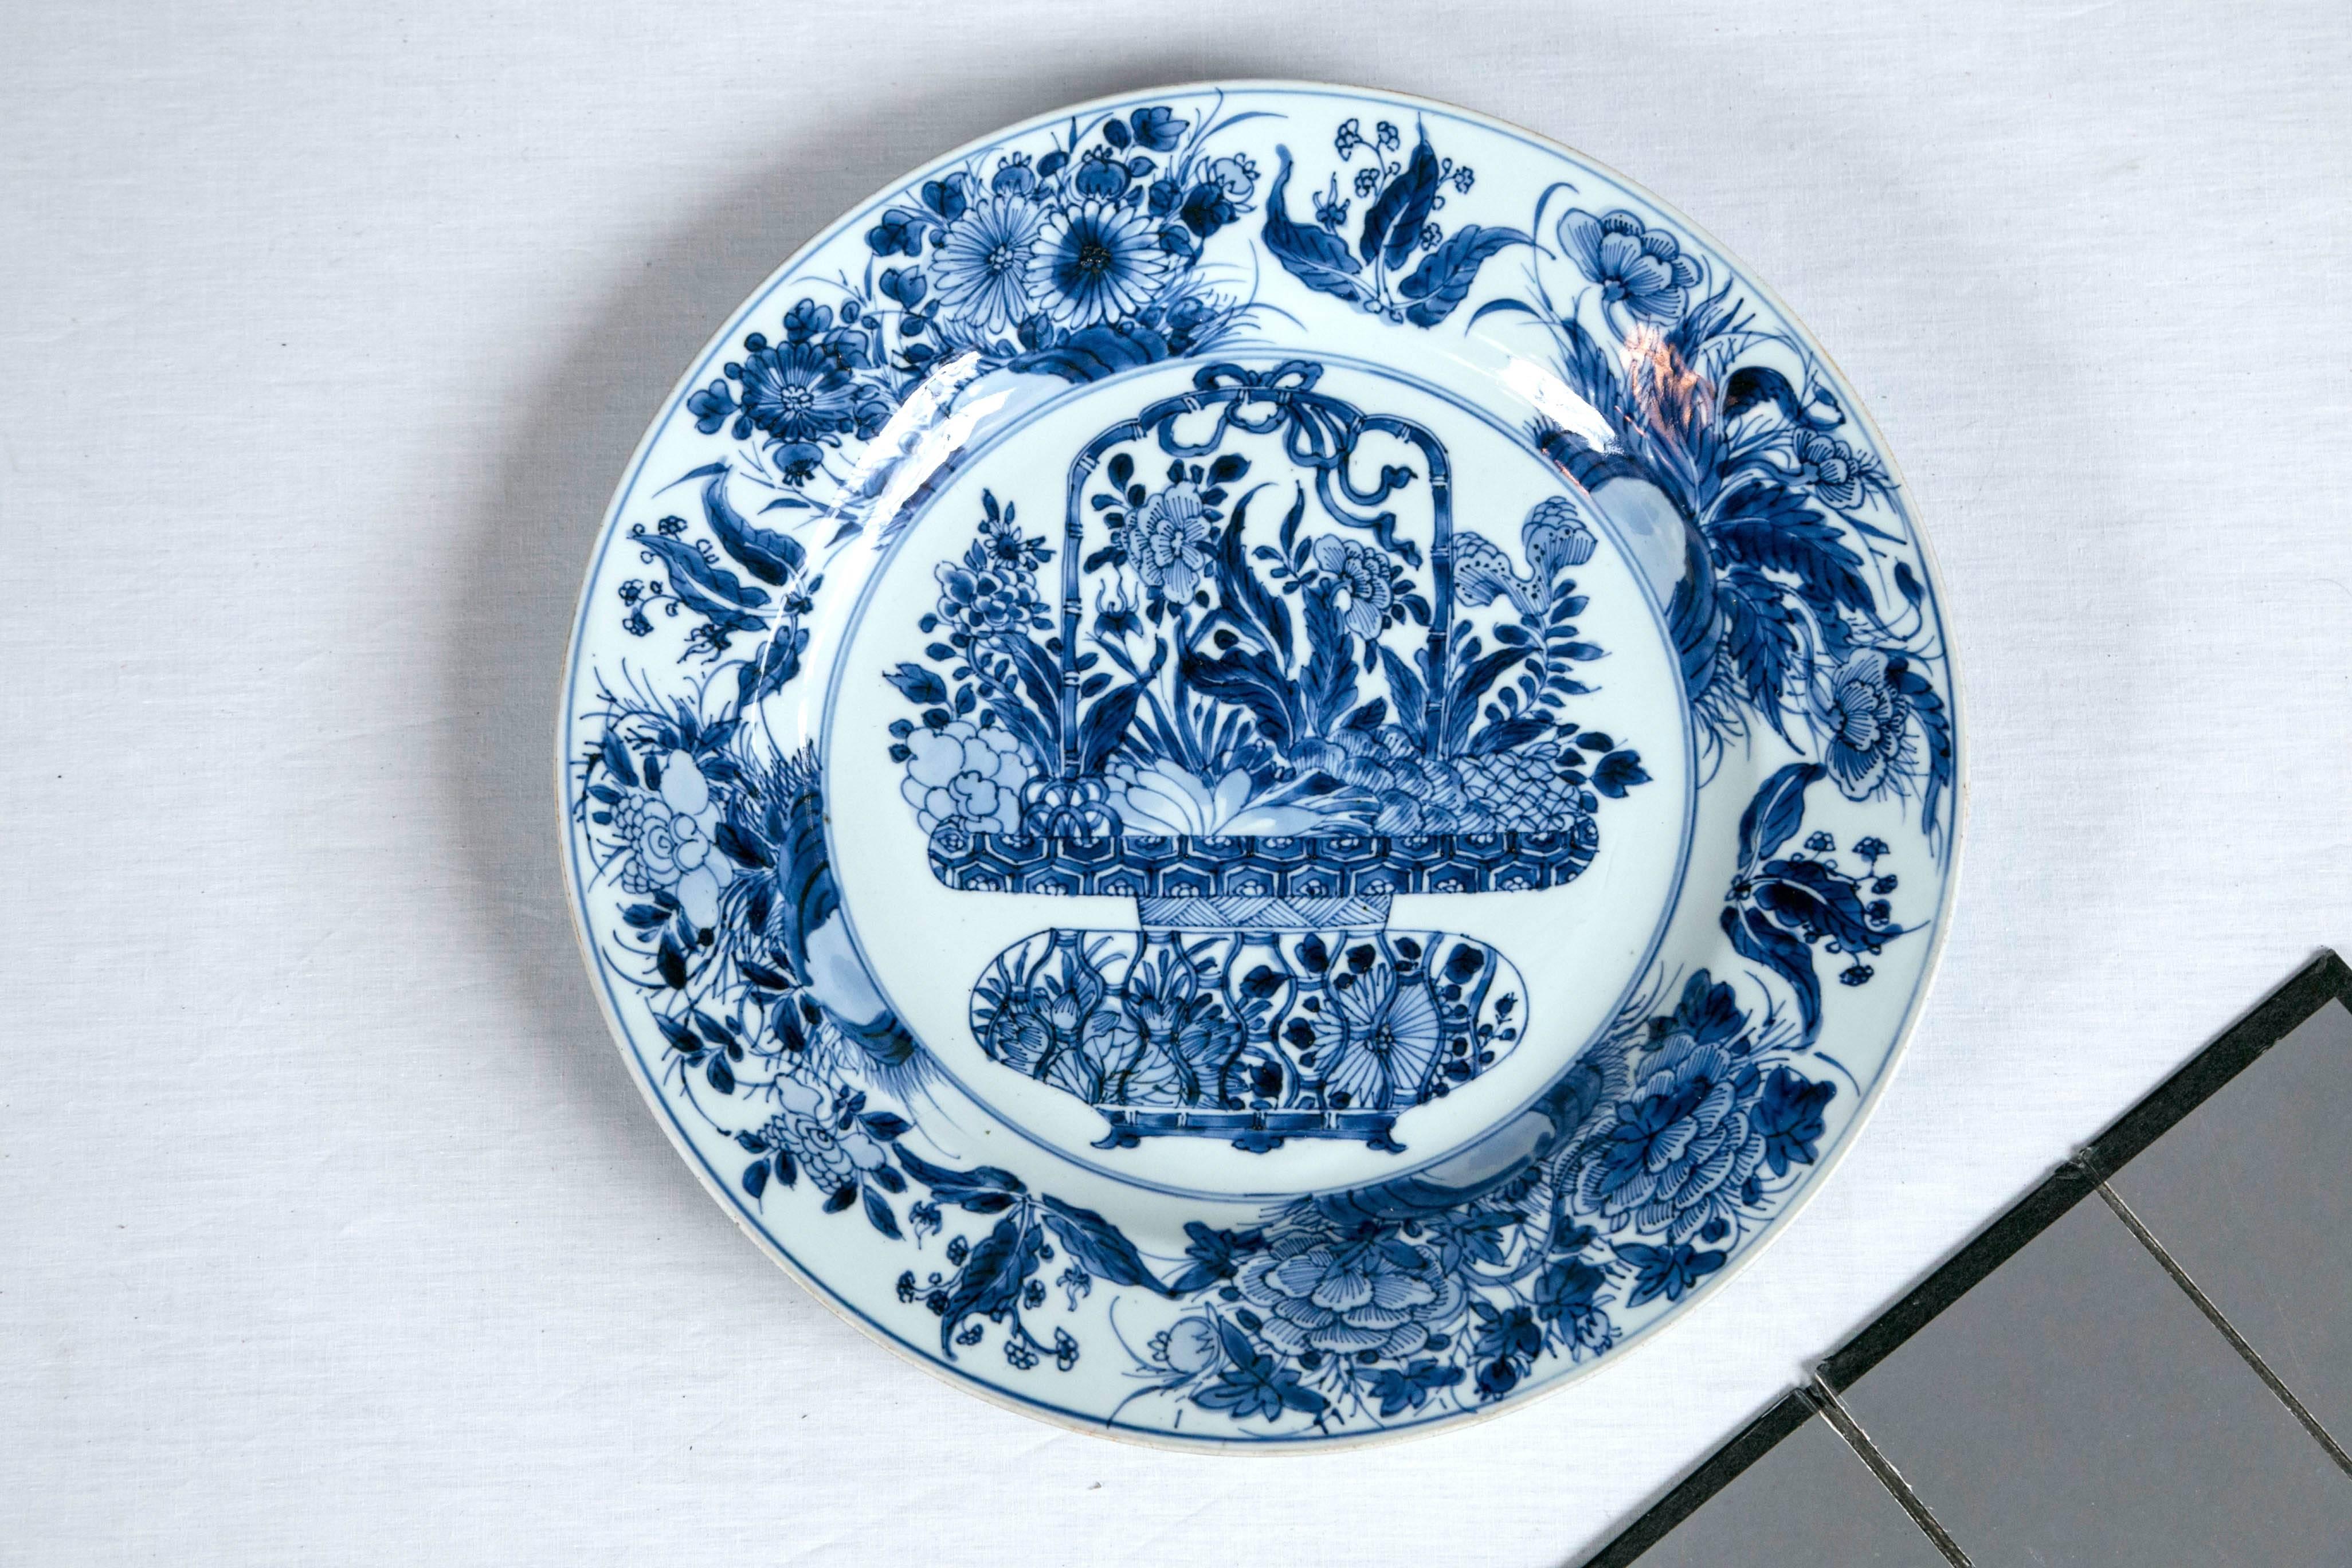 19th century Delft chinoiserie platter. Beautifully detailed floral motifs in deep blue glazes.